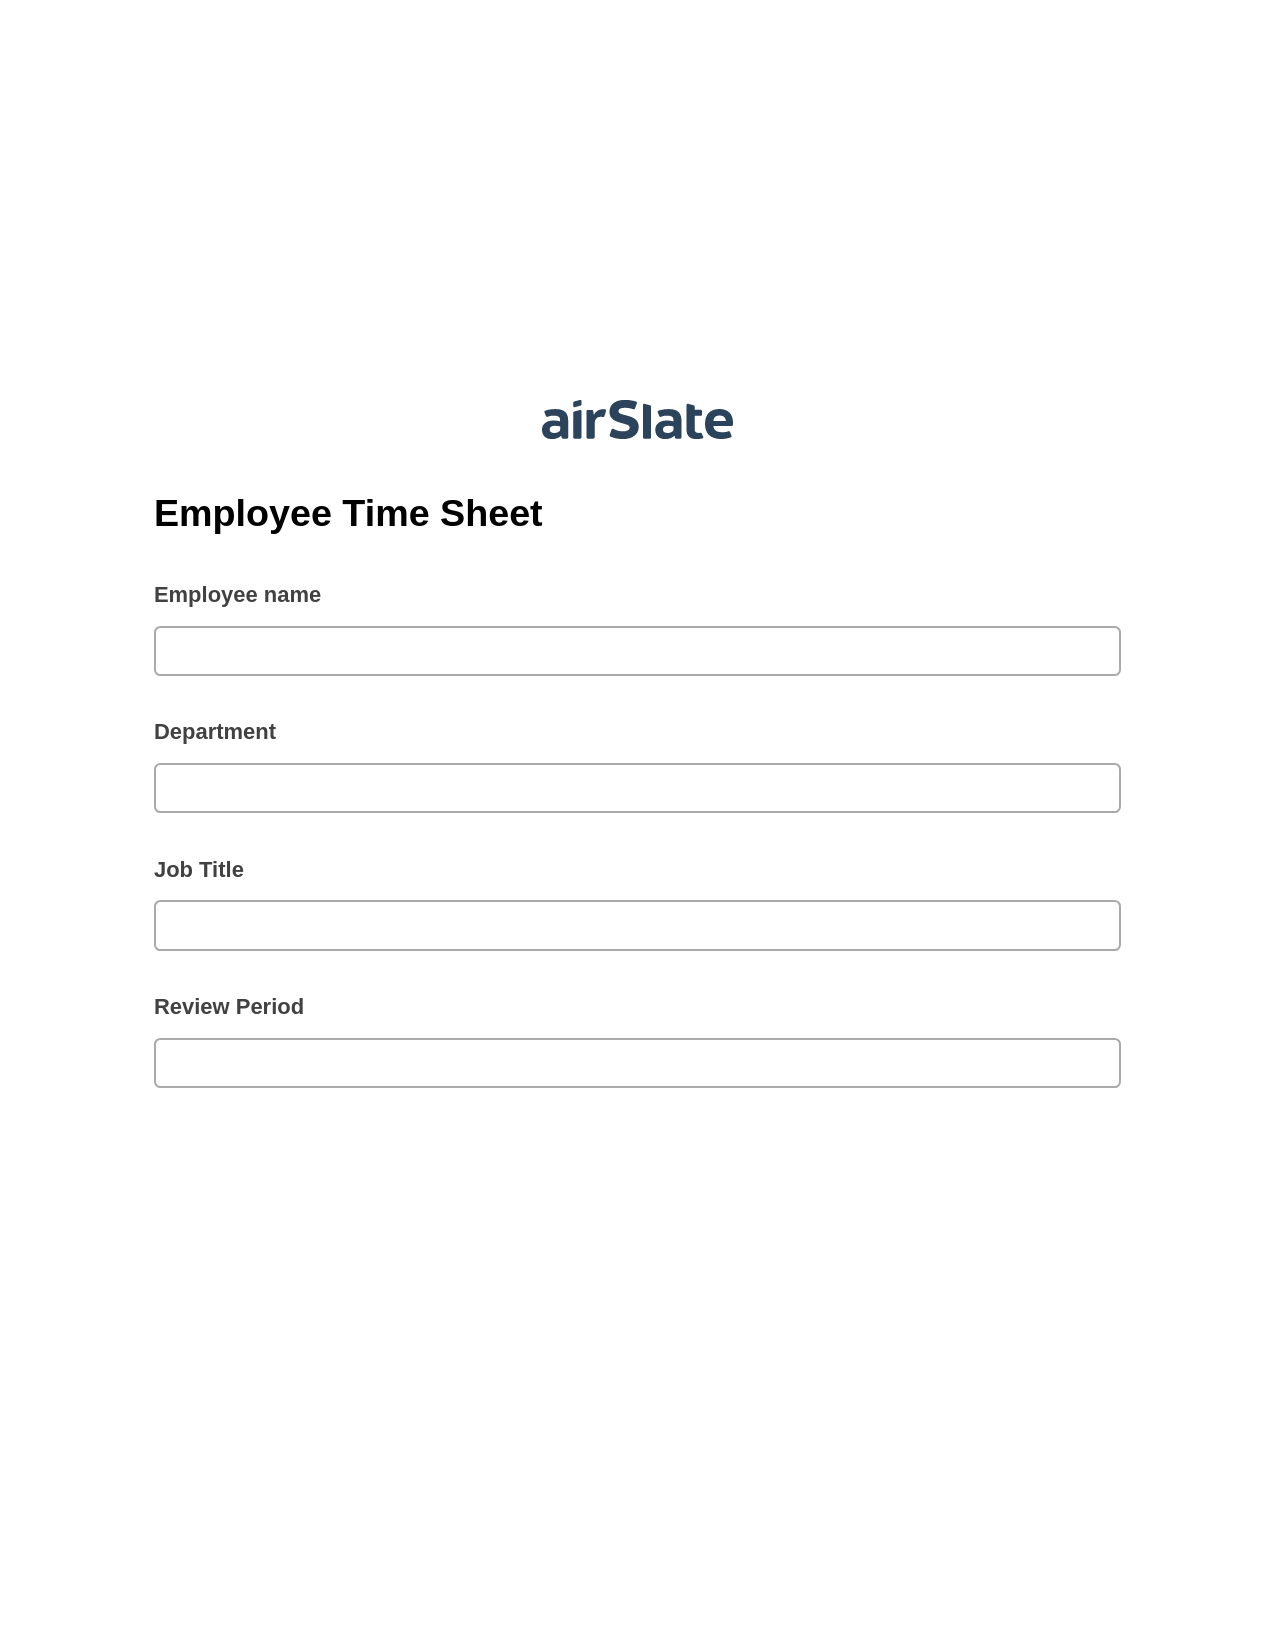 Multirole Employee Time Sheet Pre-fill from CSV File Bot, Create Salesforce Records Bot, Email Notification Postfinish Bot